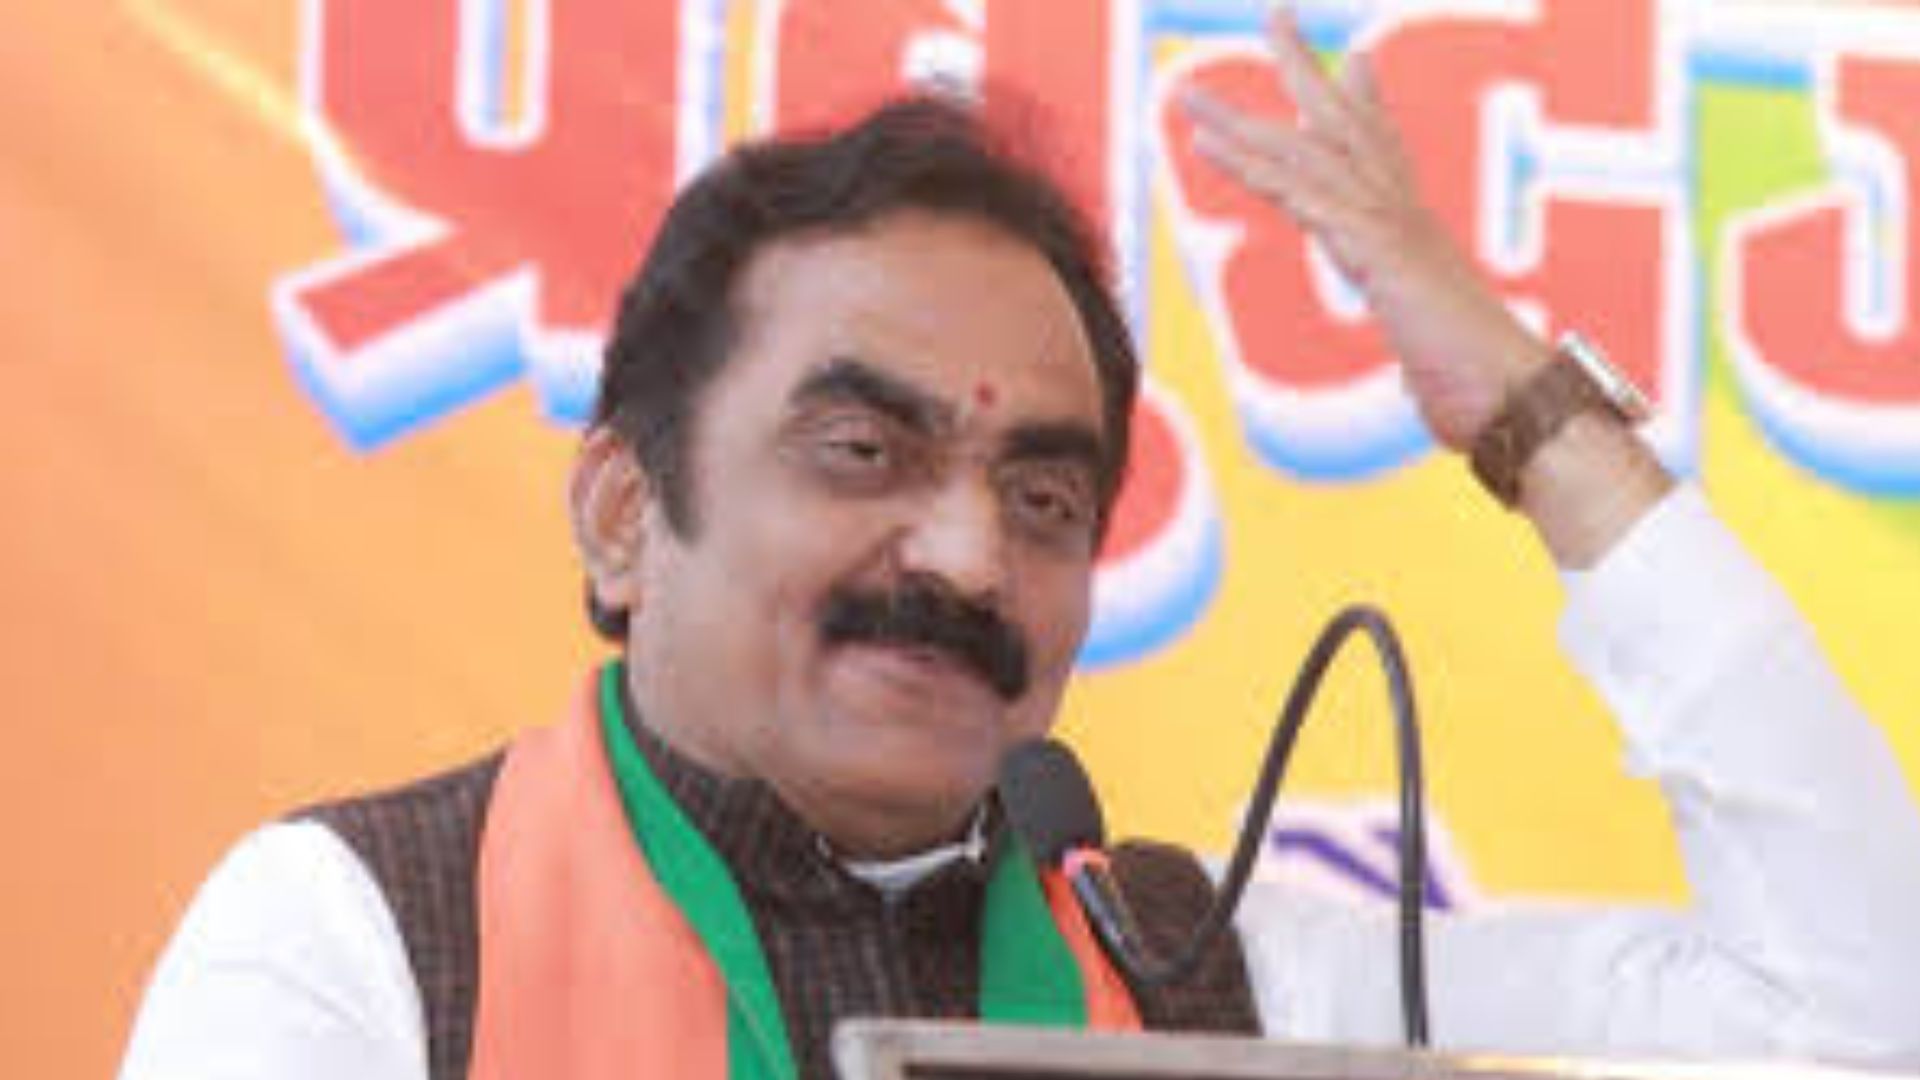 State Minister Rakesh Singh visits people who hurt during PM Modi’s rally